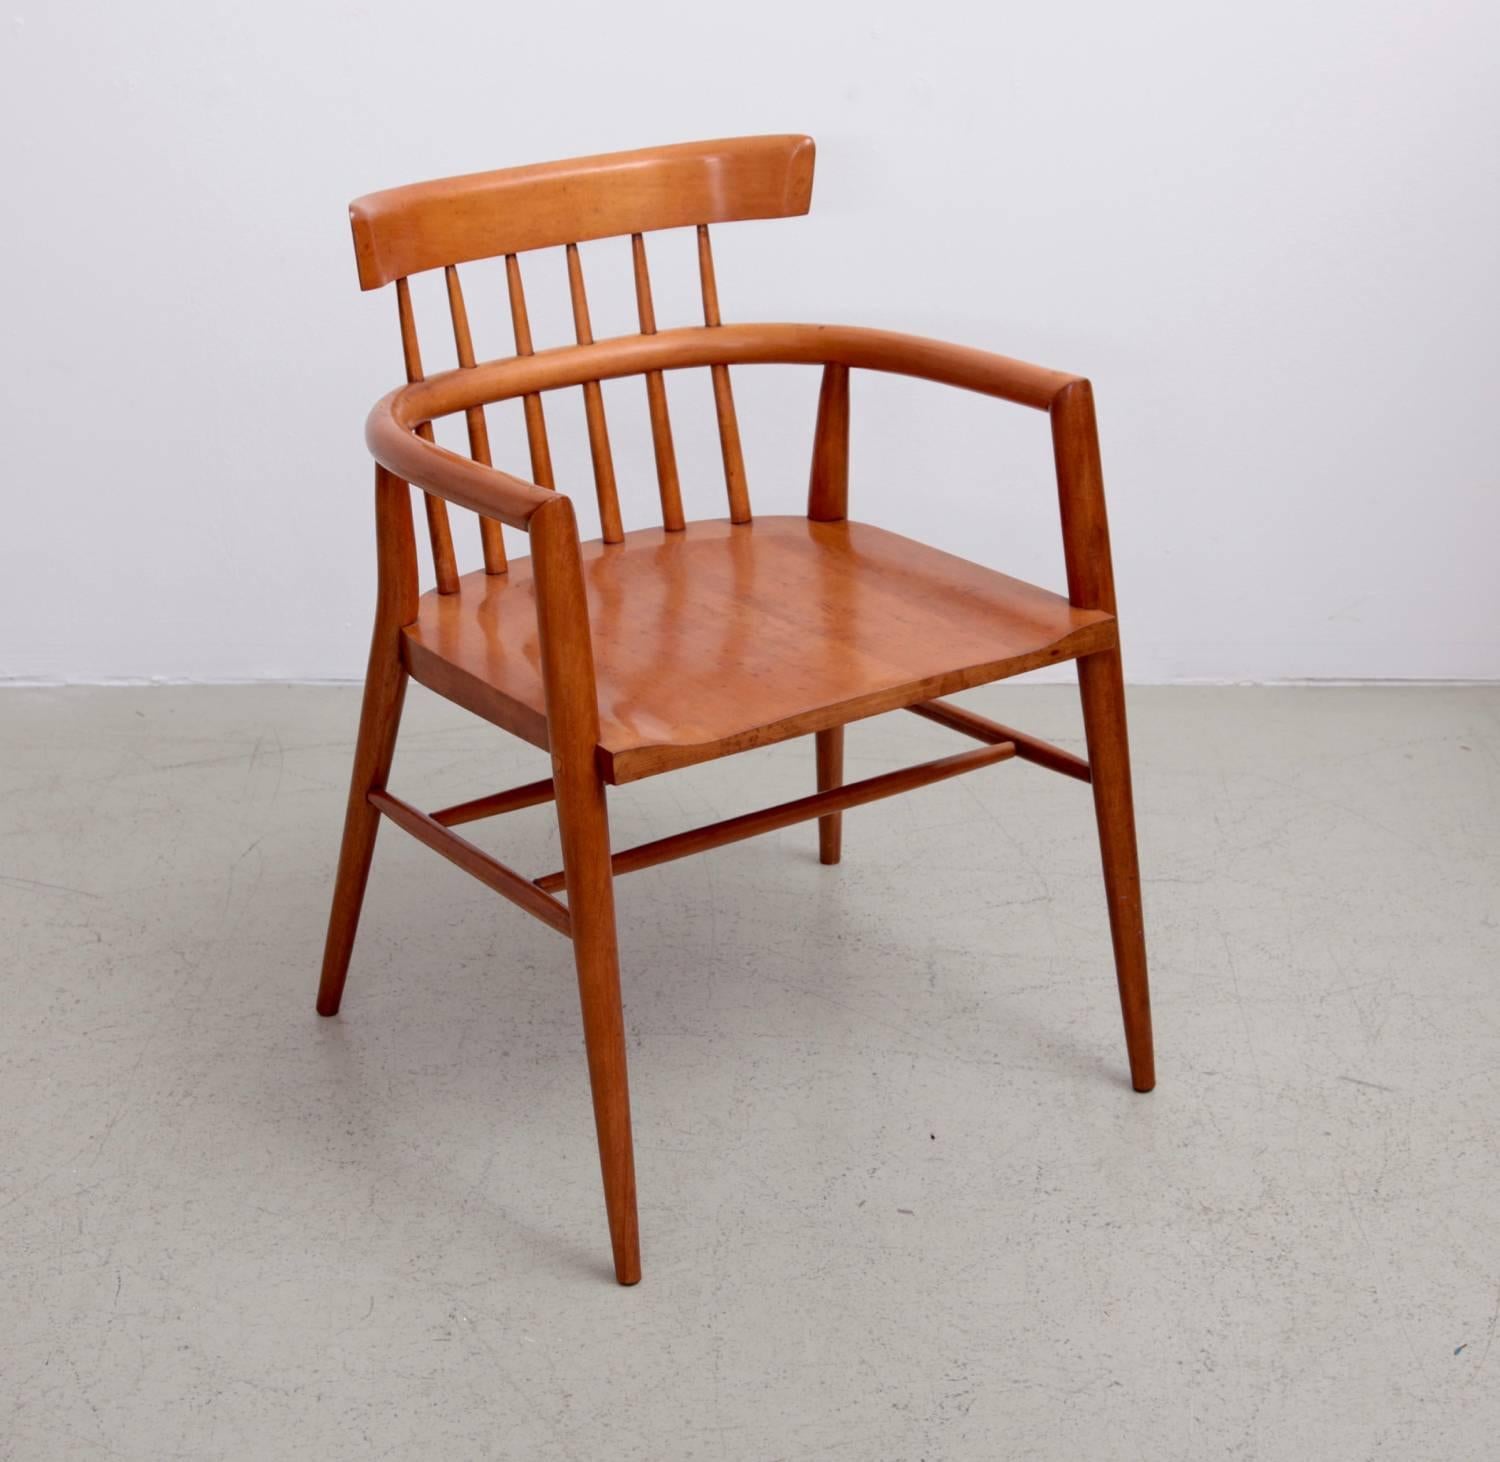 Mid-Century Modern, maple wood, spindle back, windsor style chair by Paul McCobb for Planner Group in restored condition.